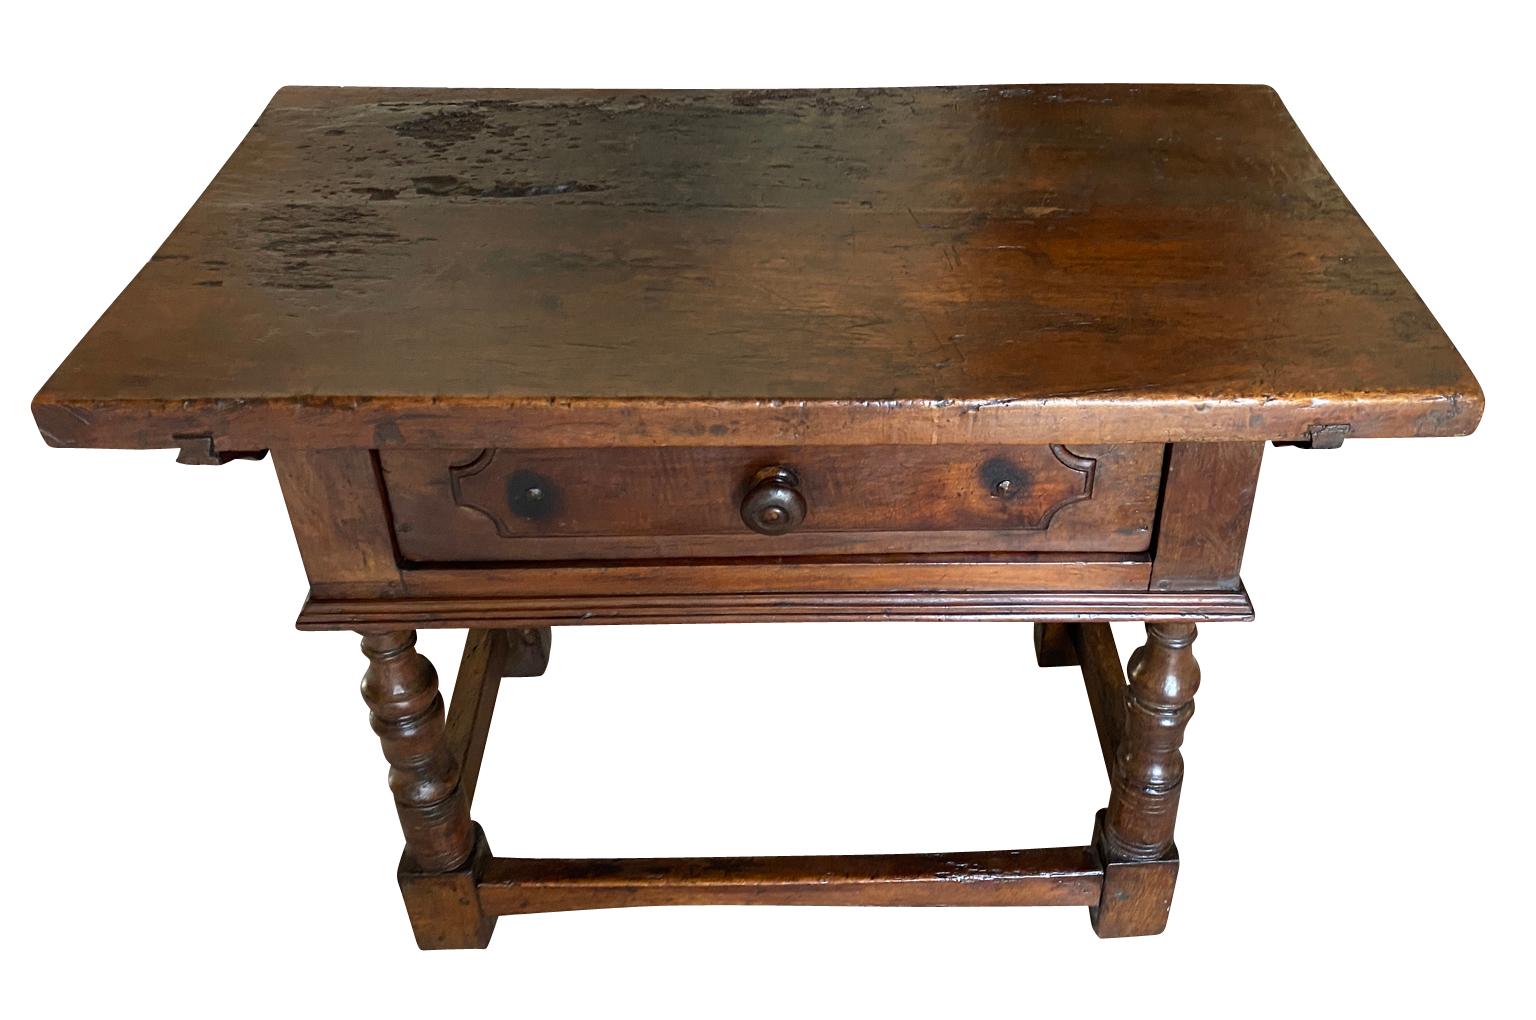 A very handsome 17th century side table from the Tuscan region of Italy. Beautifully constructed from walnut with a single drawer and nicely turned legs.